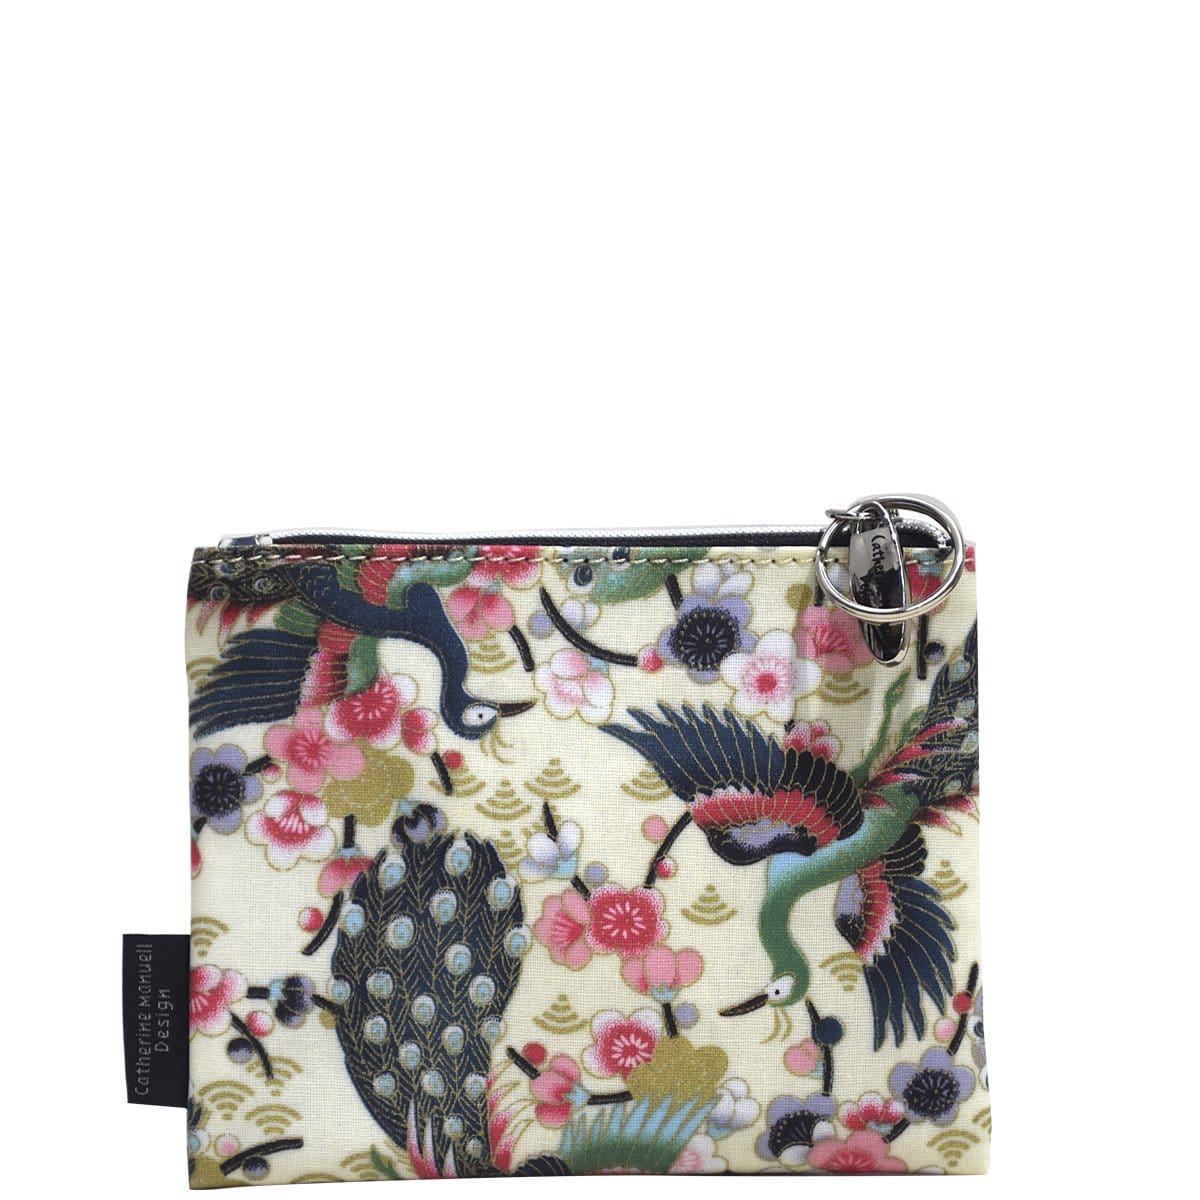 Everyday Purse - Peacock Canvas - 20% off